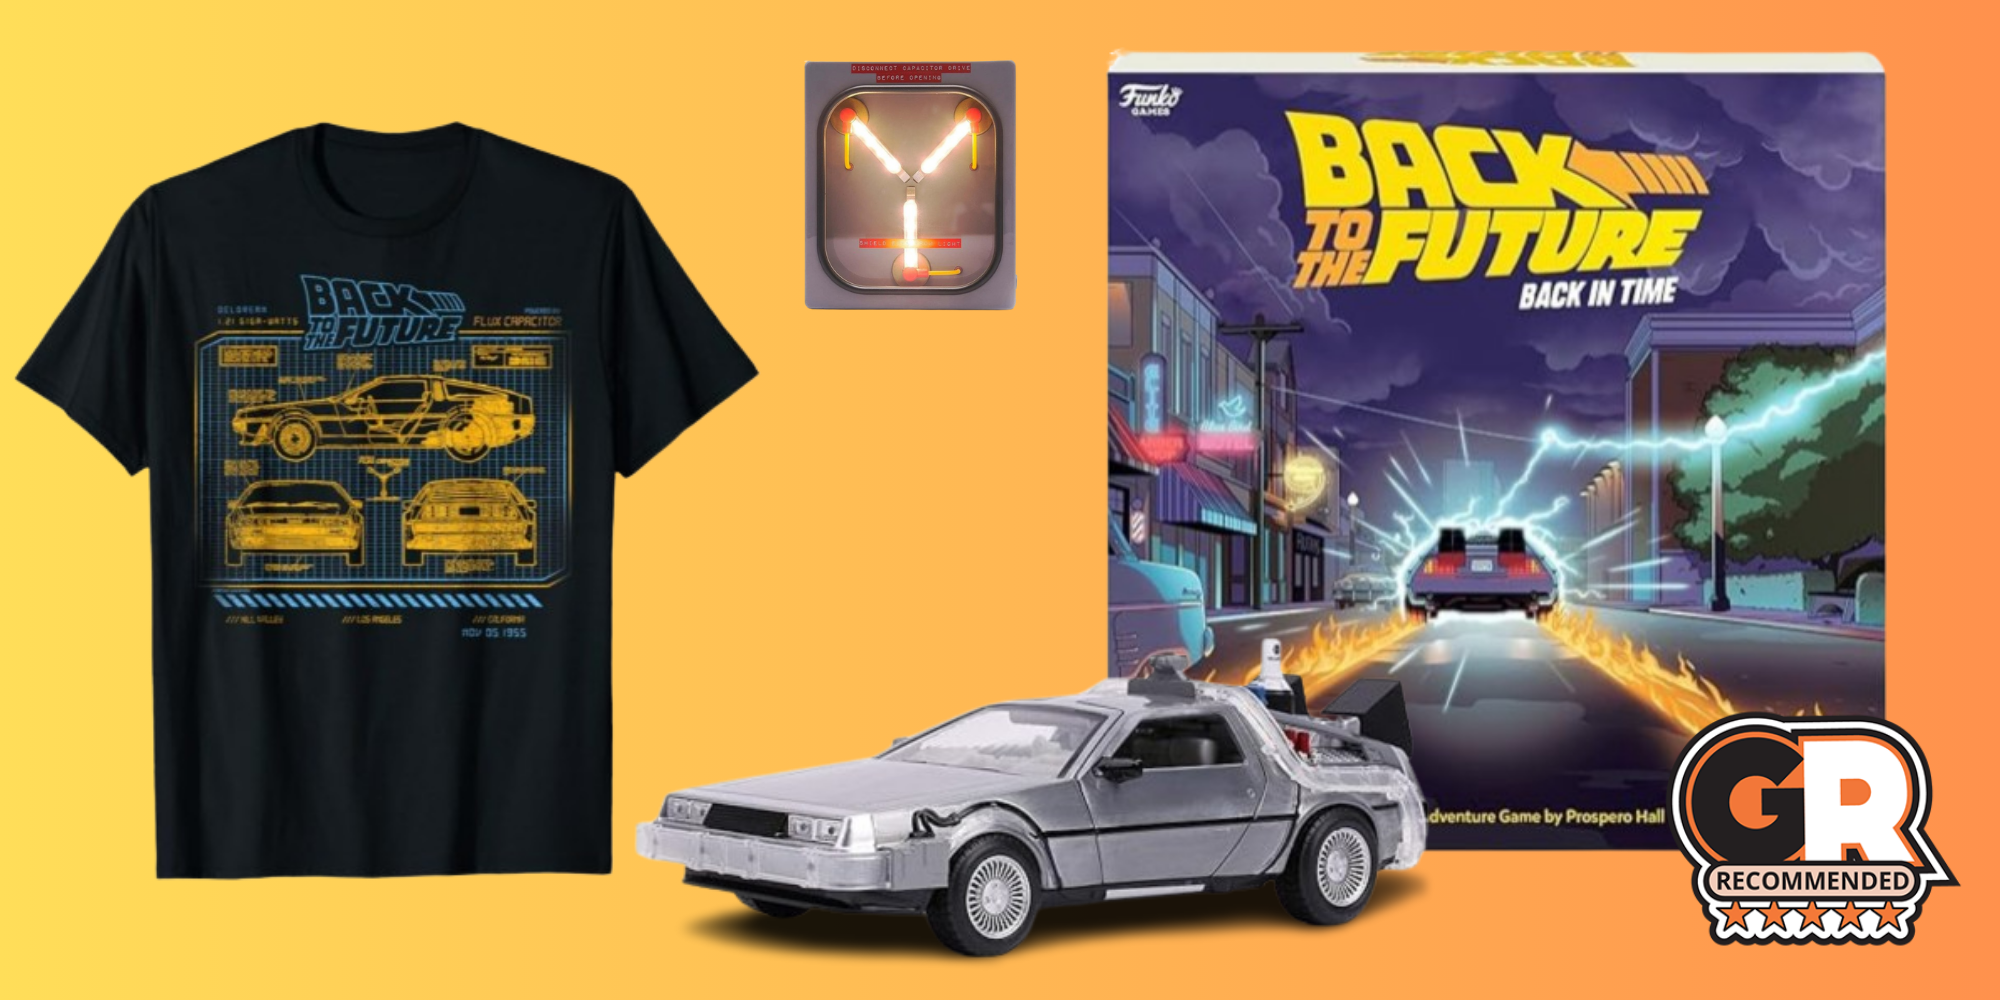 Back to the Future merchandise from the popular sci-fi triolgy.